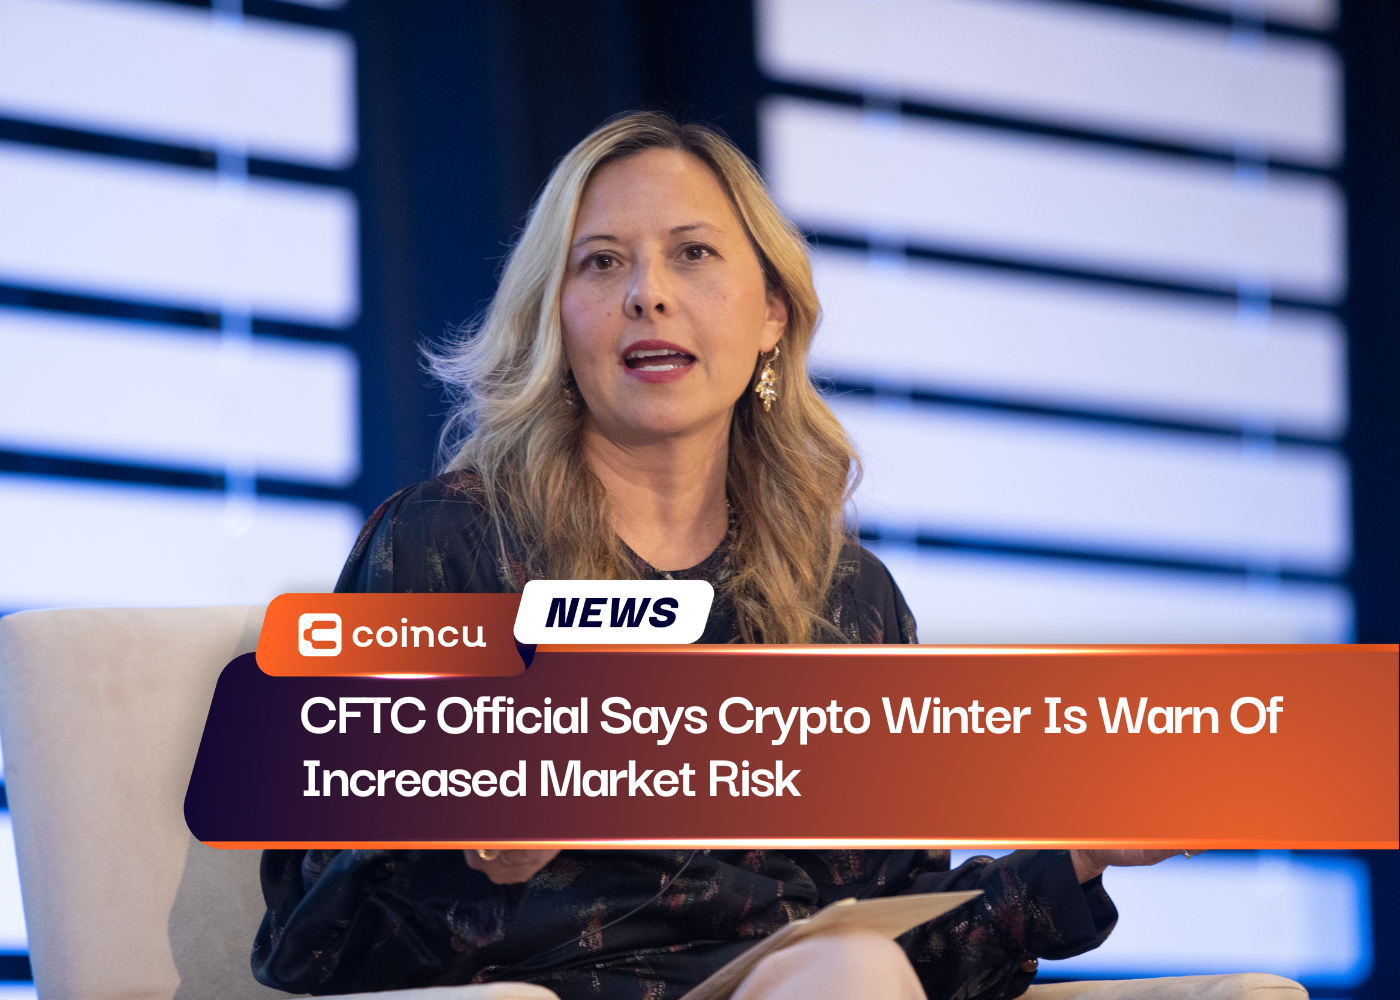 CFTC Official Says Crypto Winter Is Warn Of Increased Market Risk